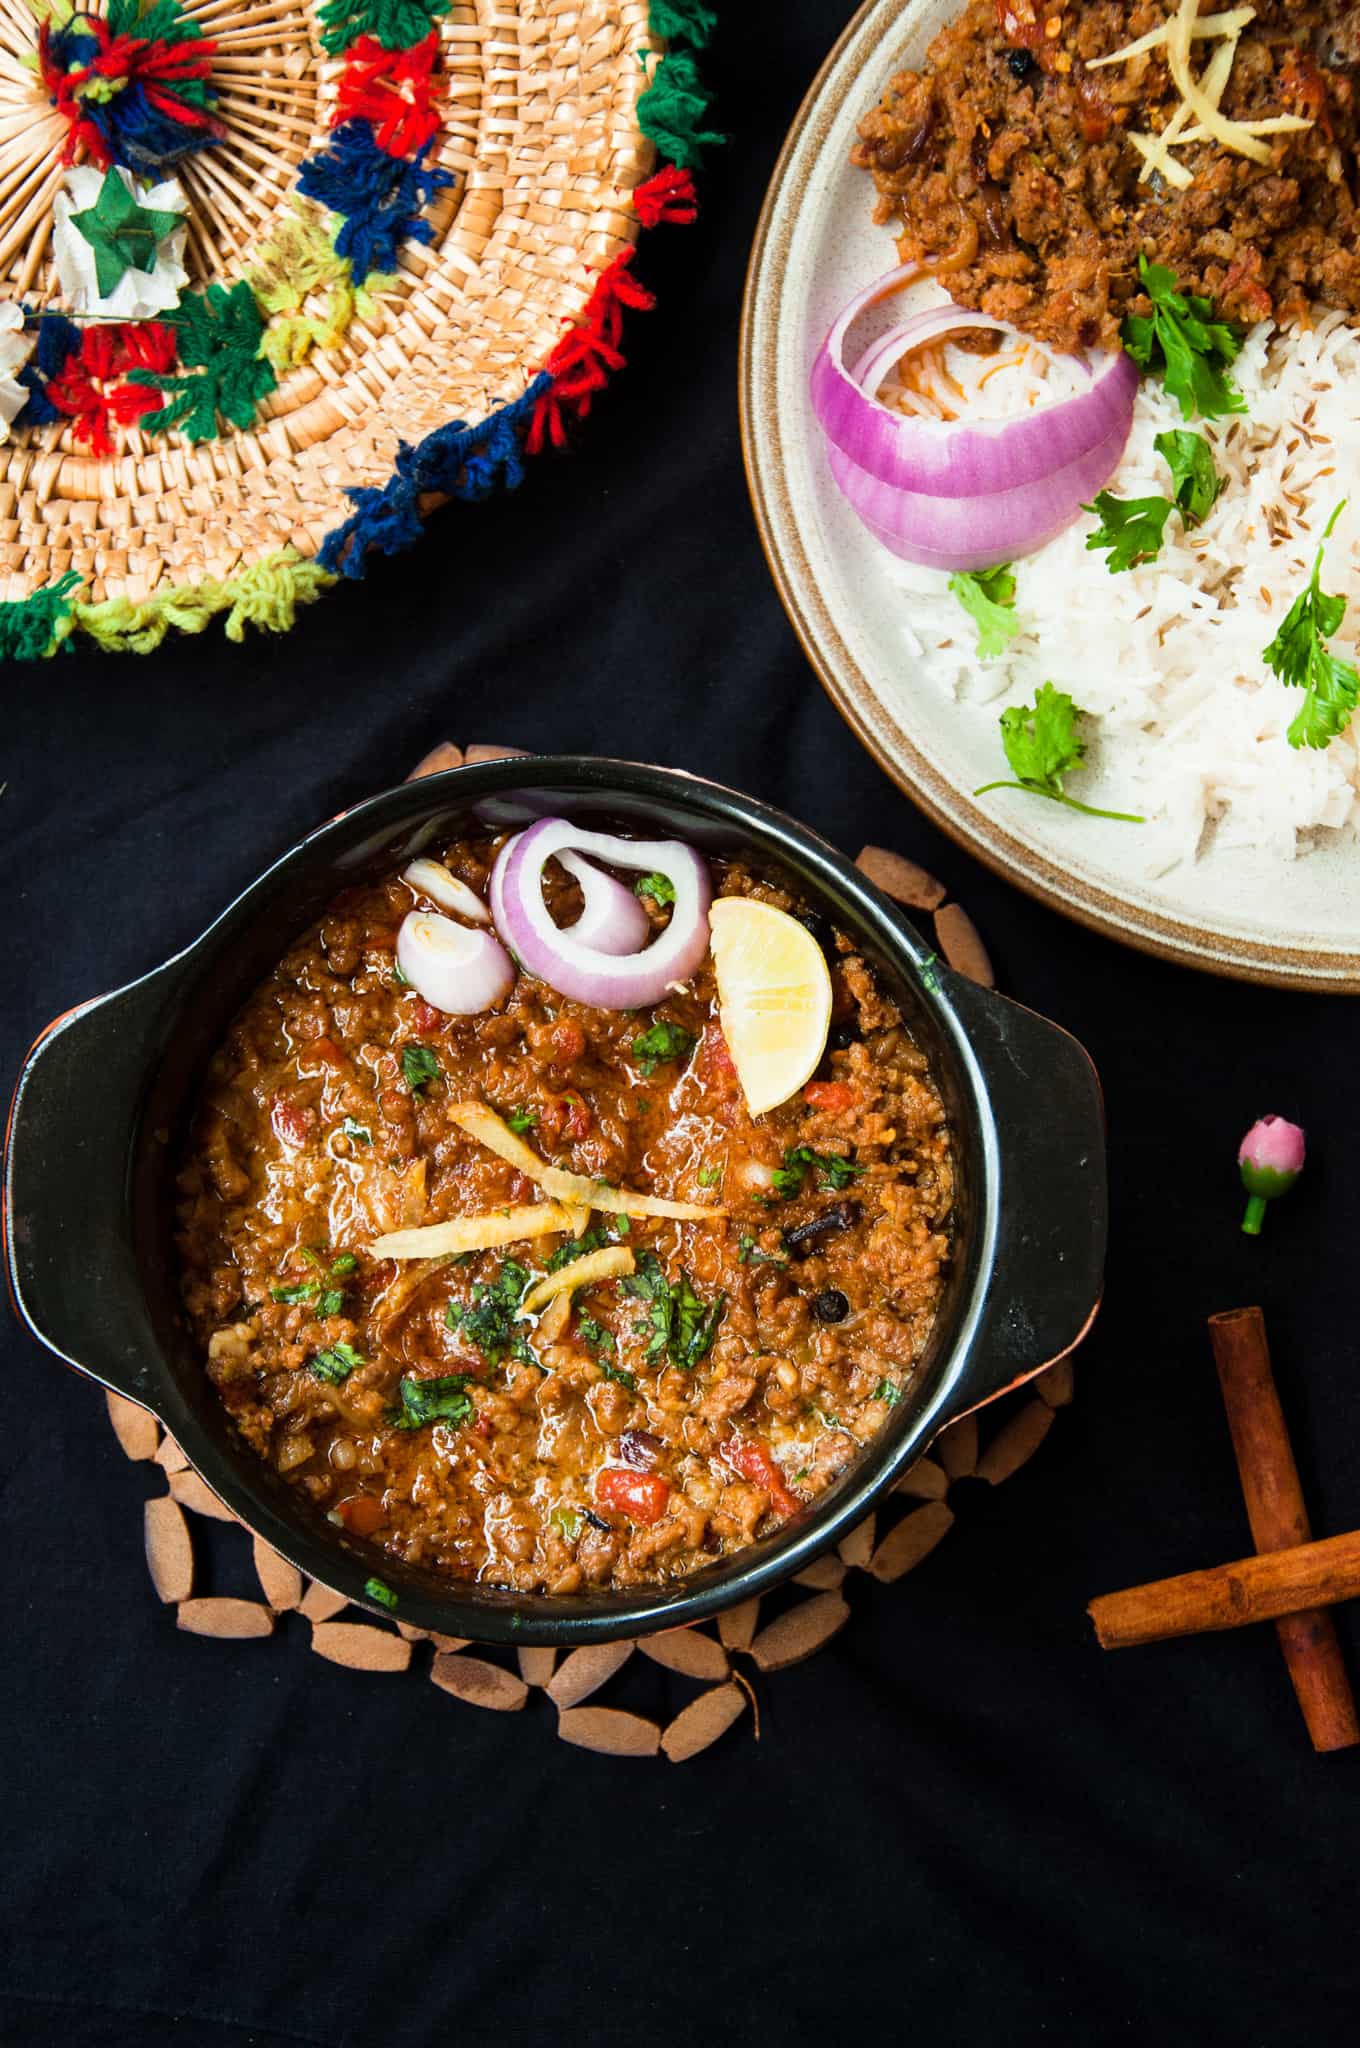 Pakistani Keema served in small black pot with onion slices and lemon wedges on the side.